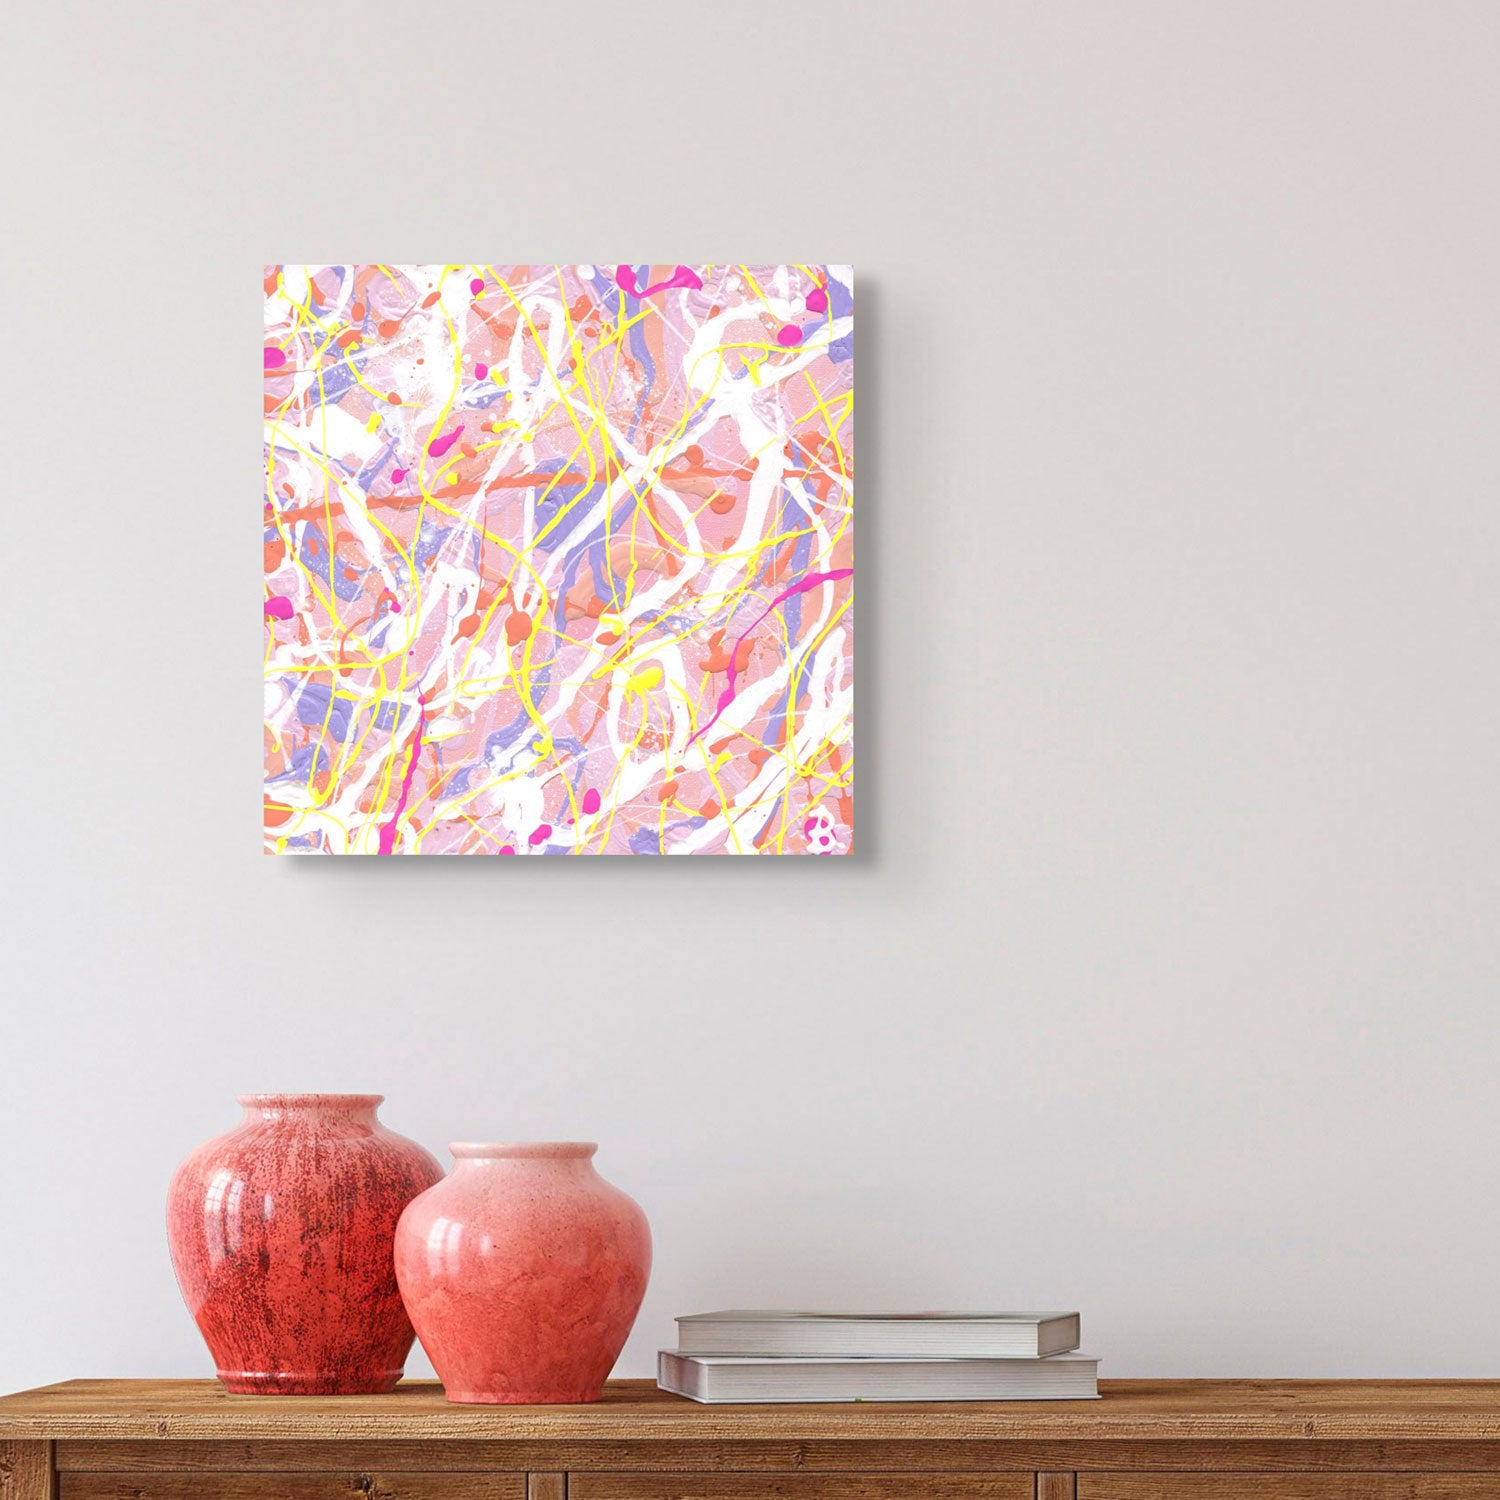 'Cupcake II' original abstract expressionism painting on canvas by Bridget Bradley, seen hanging in situ above orange vases on wooden console with books. This beautiful textured abstract. is available now!